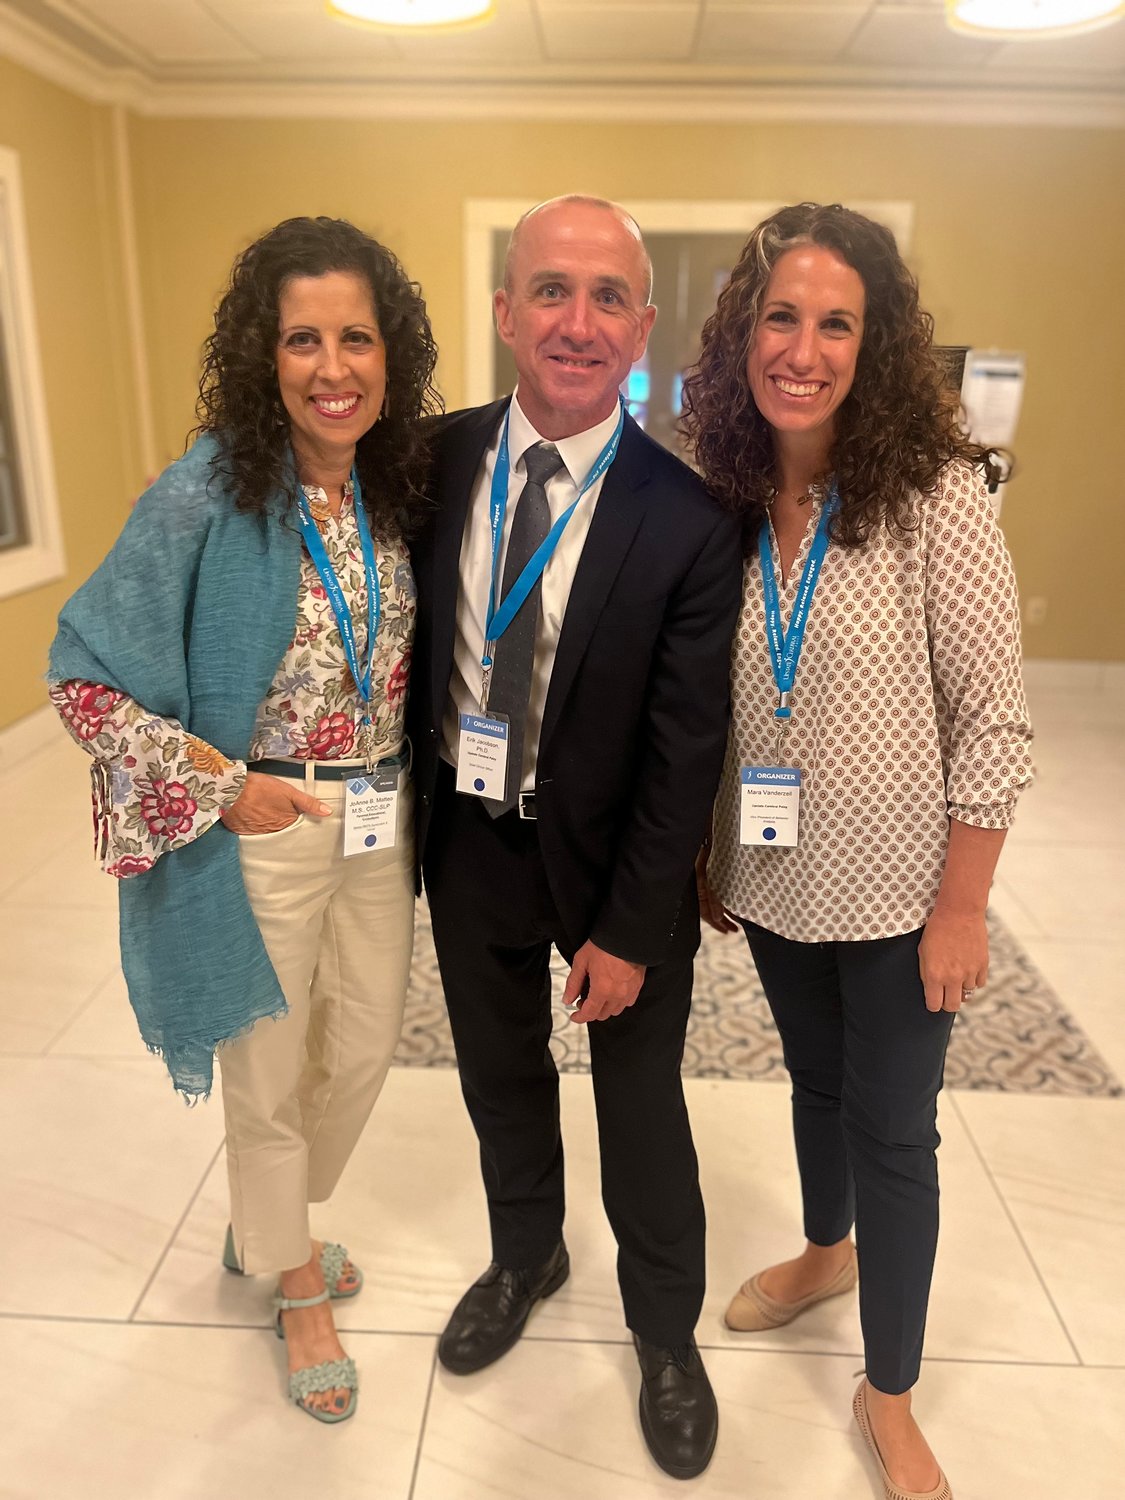 UCP Chief Clinical Officer Dr. Erik Jacobson, poses with UCP Vice President of Behavior Analysis Dr. Mara Vanderzell, right, and conference speaker Jo-Anne Matteo, M.S., CCC/SLP of Pyramid Educational Consultants.